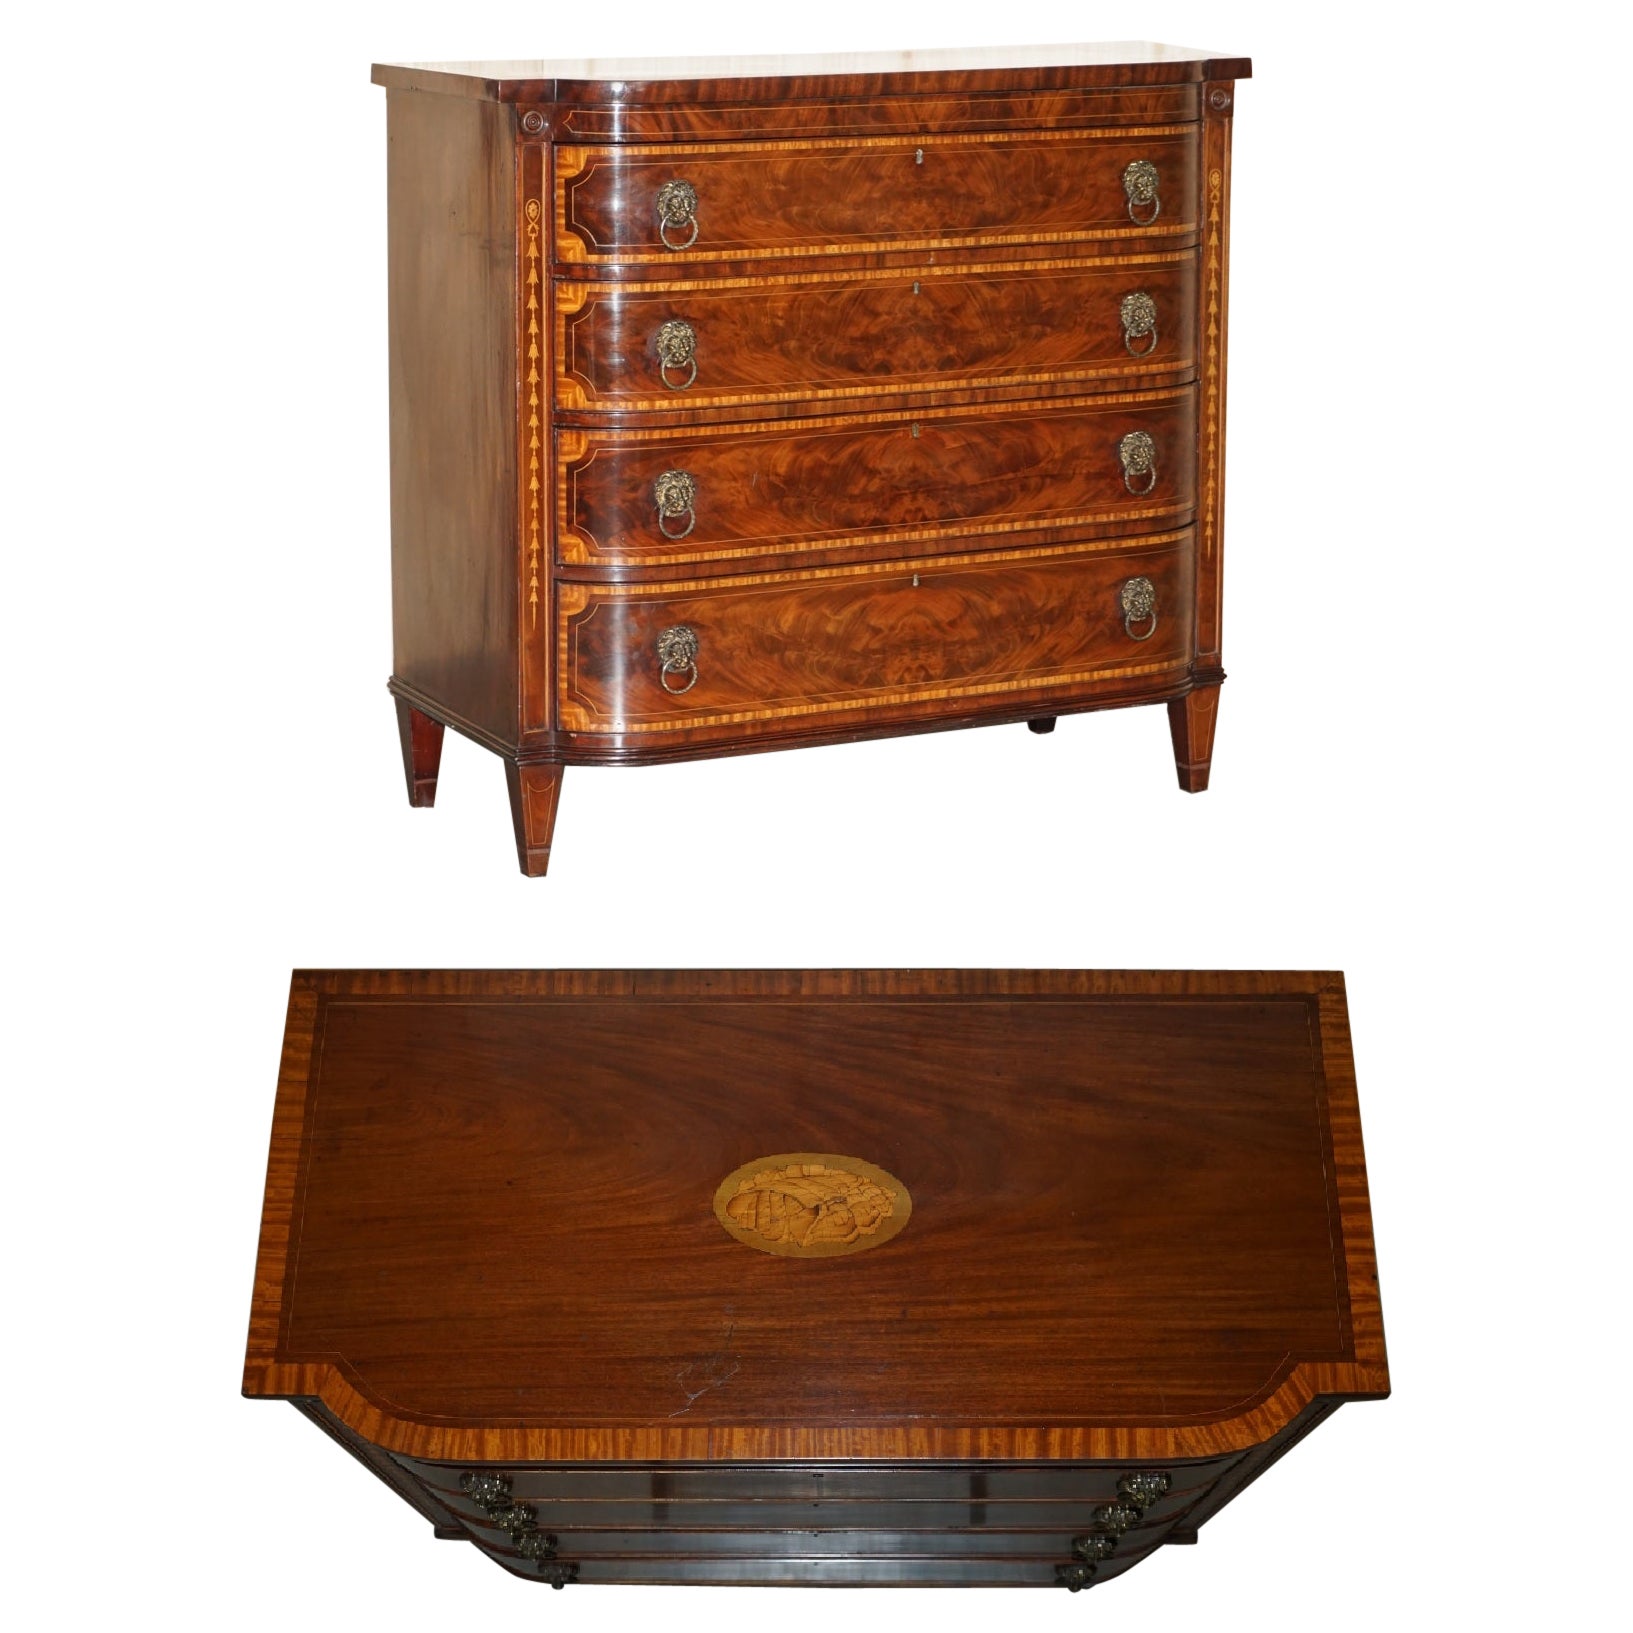 SHERATON 1859 DATED FLAMED HARDWOOD LION HEAD HANDLE CHEST OF DRAWERs